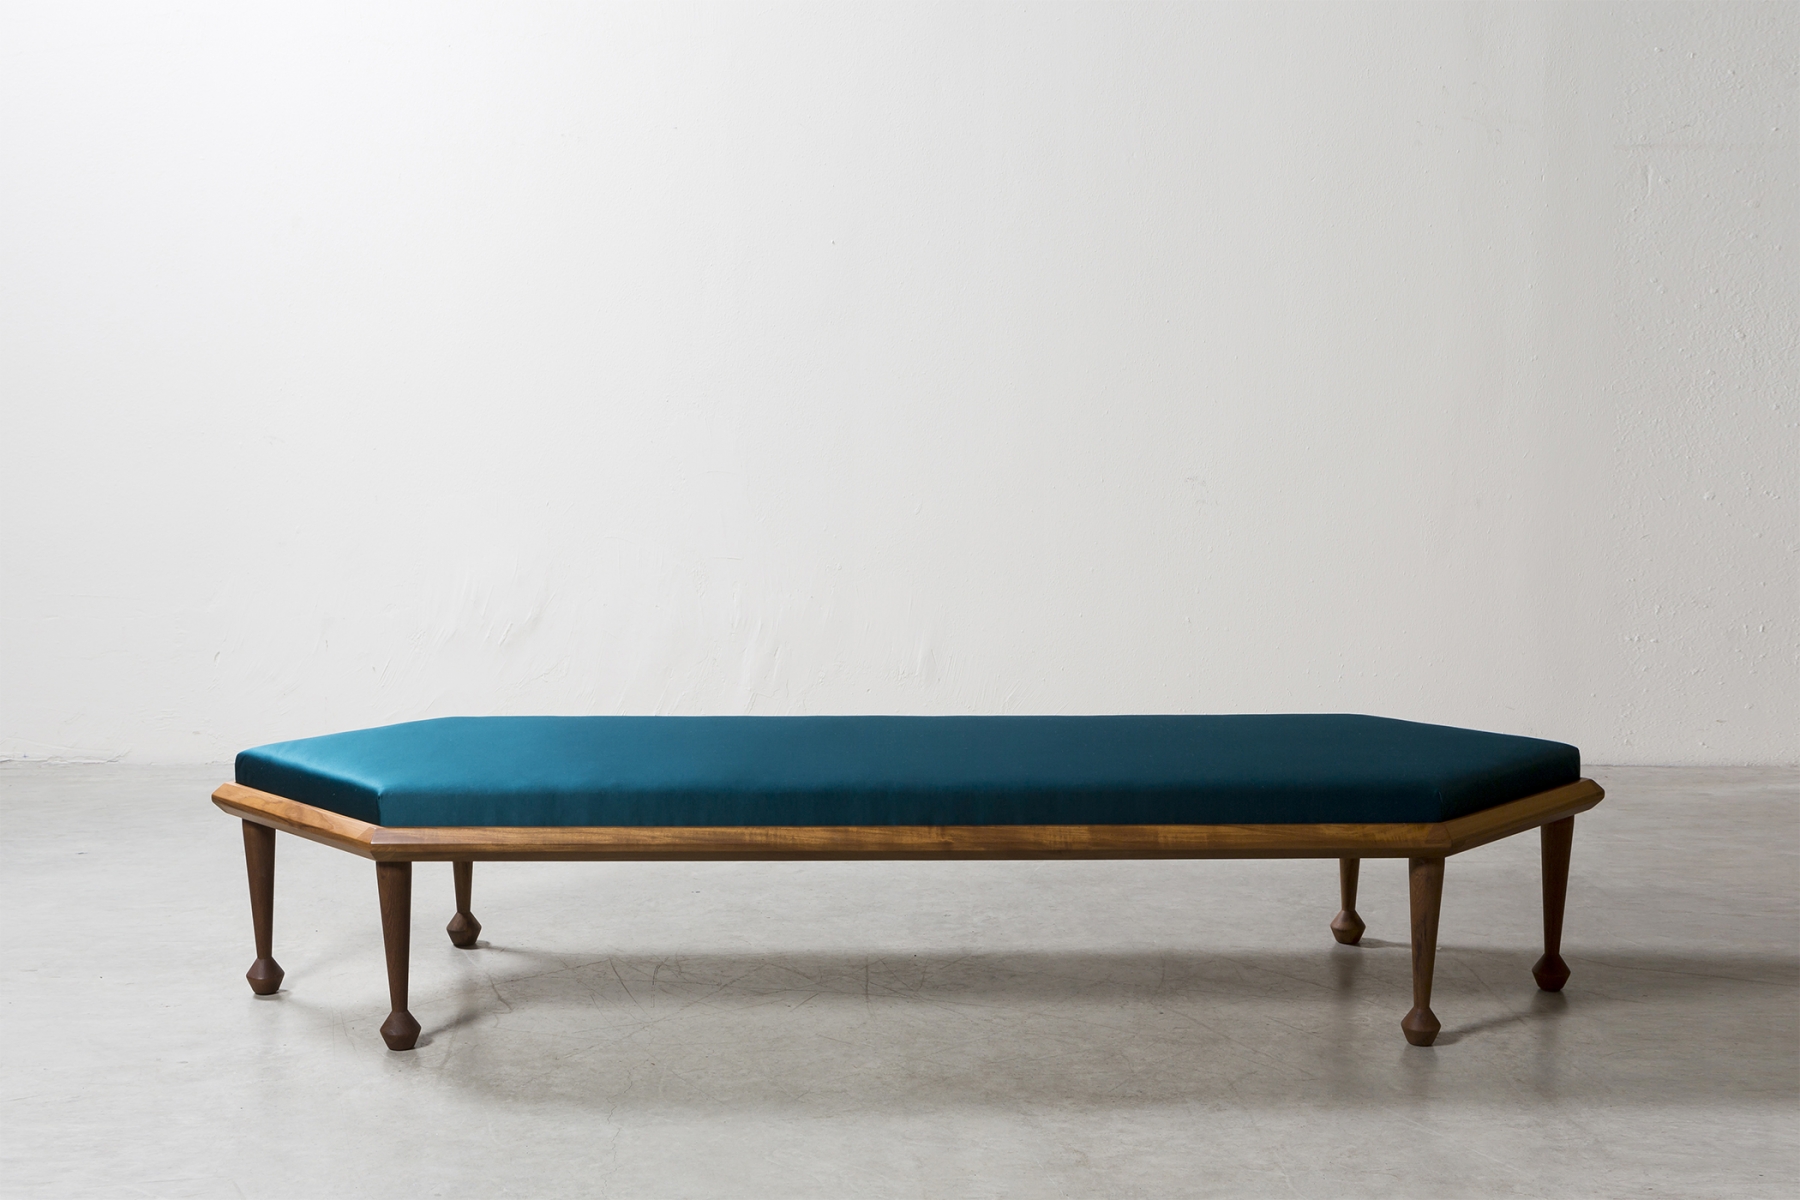 Two benches 'Large Upholstered Bench'  Martino Gamper pic-1